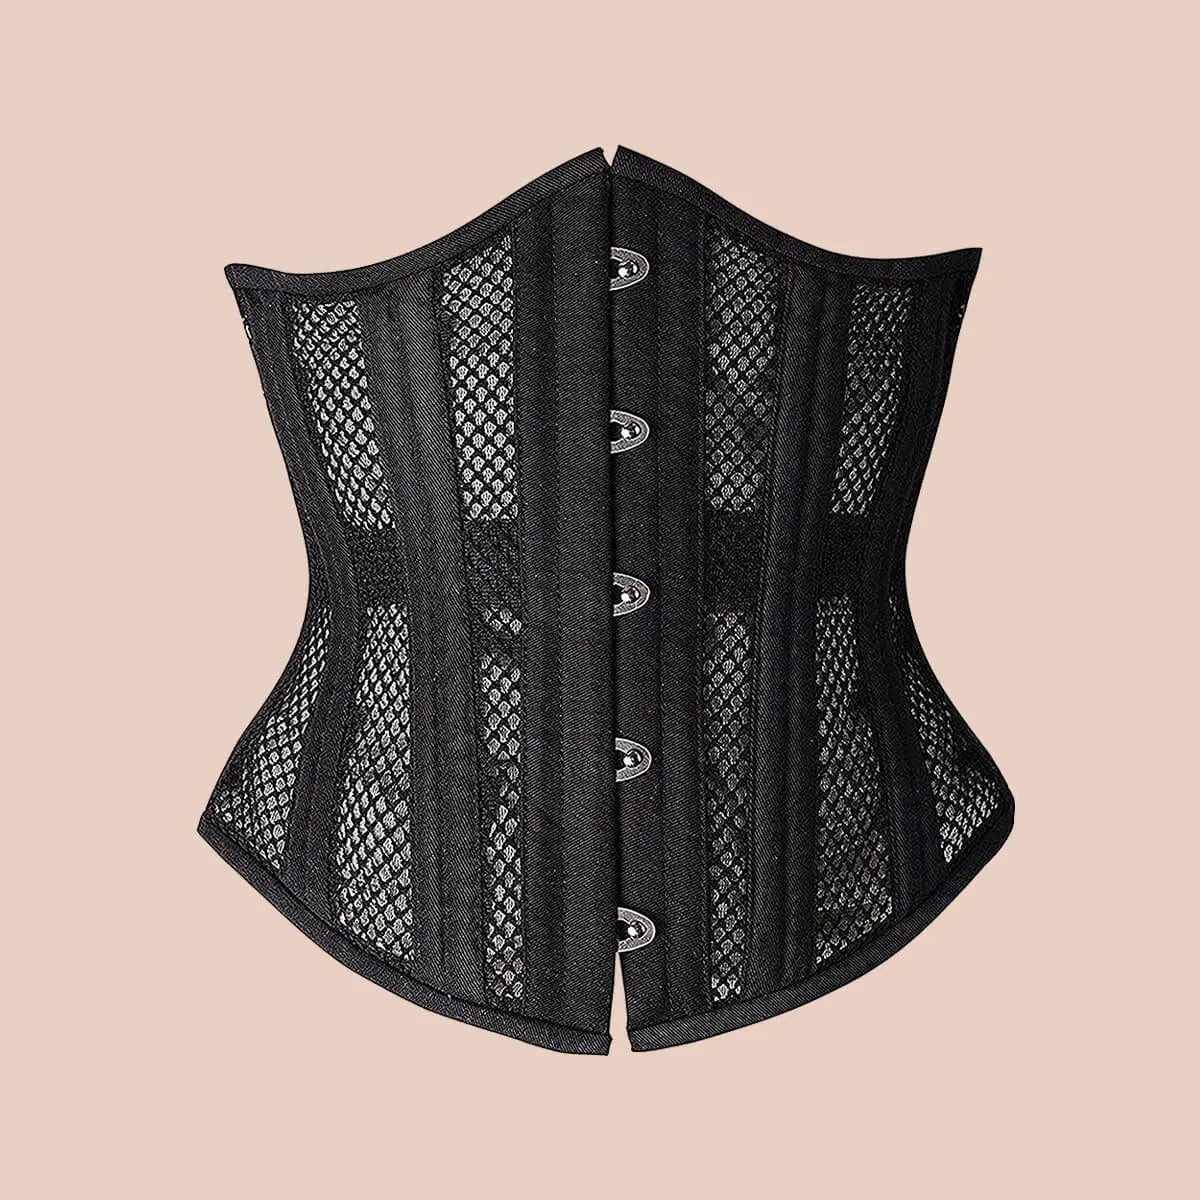 Find Cheap, Fashionable and Slimming double steel boned corset